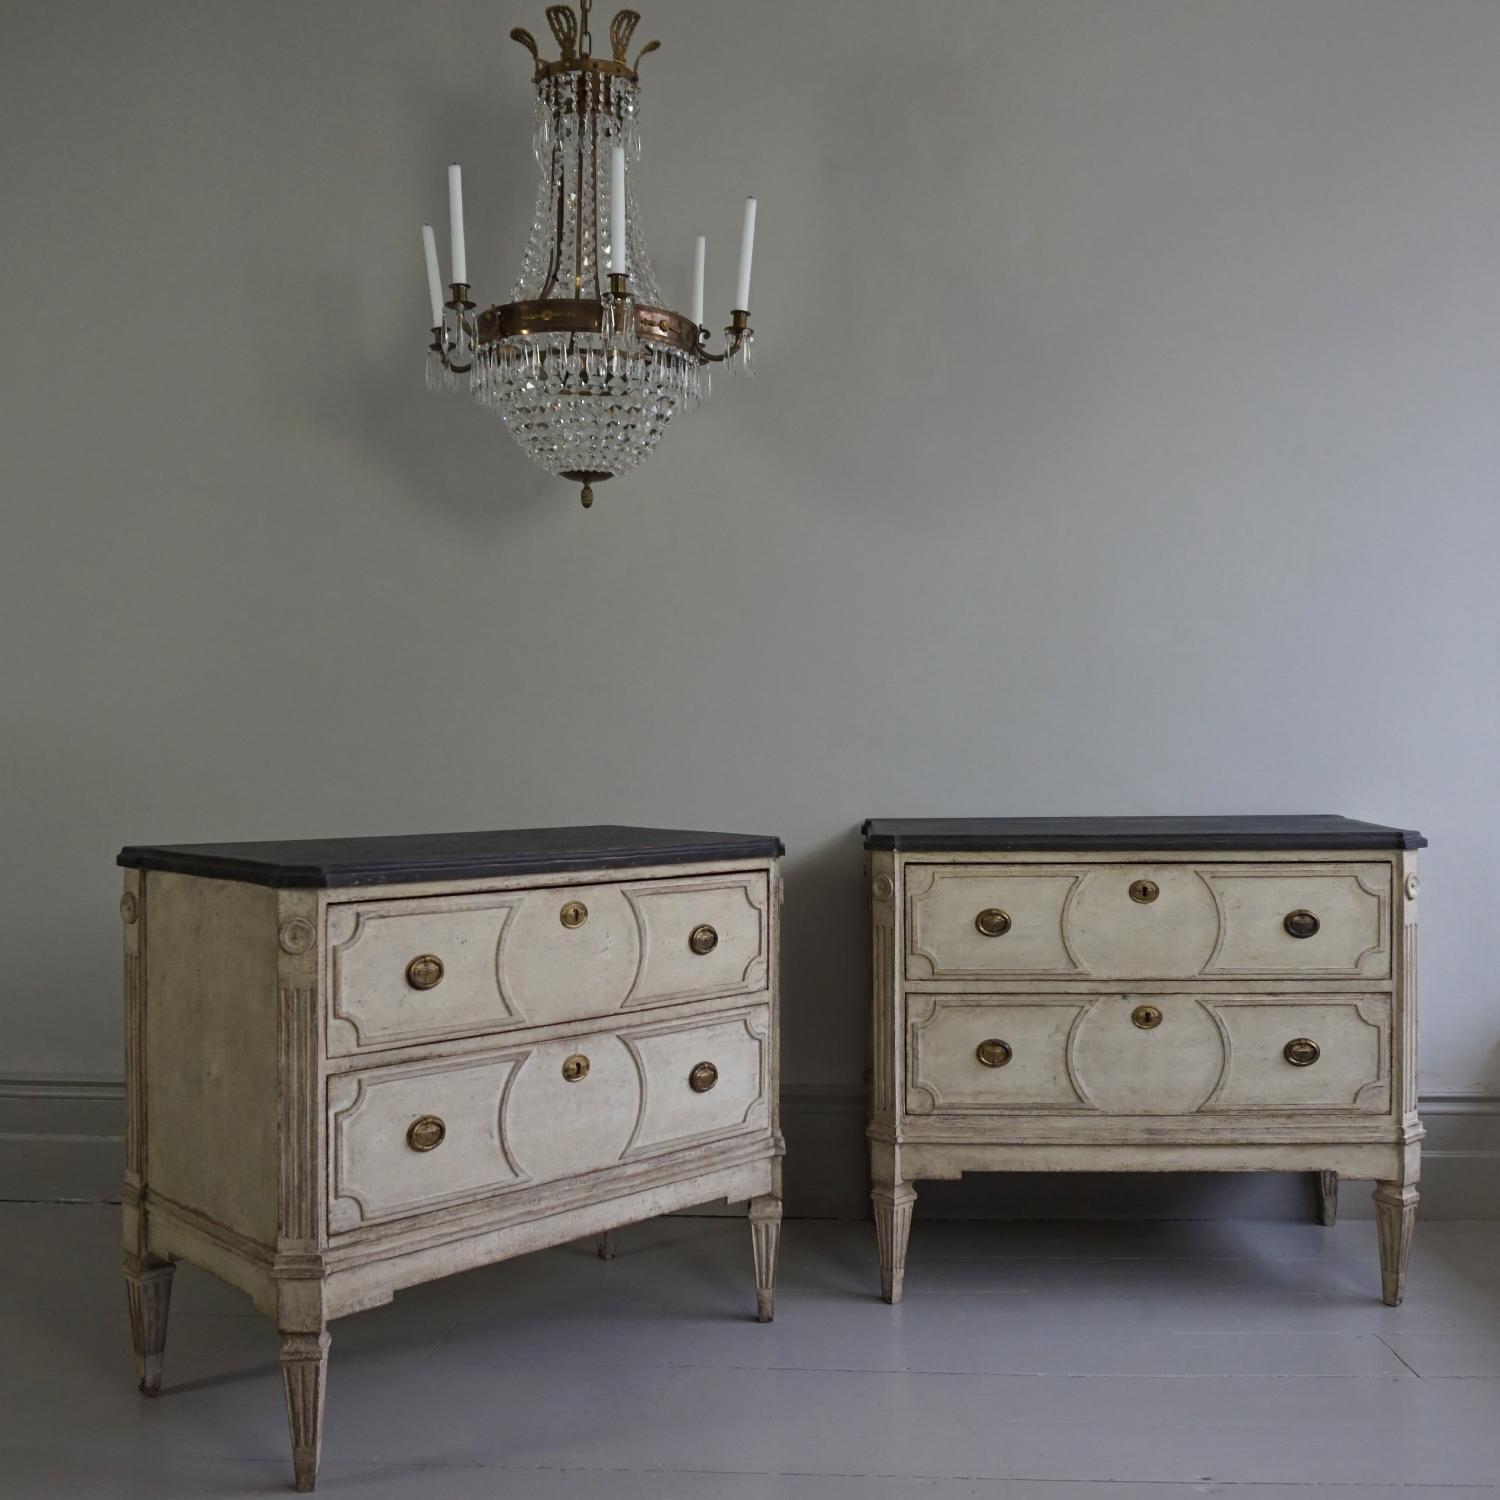 PAIR OF RICHLY CARVED GUSTAVIAN STYLE CHESTS